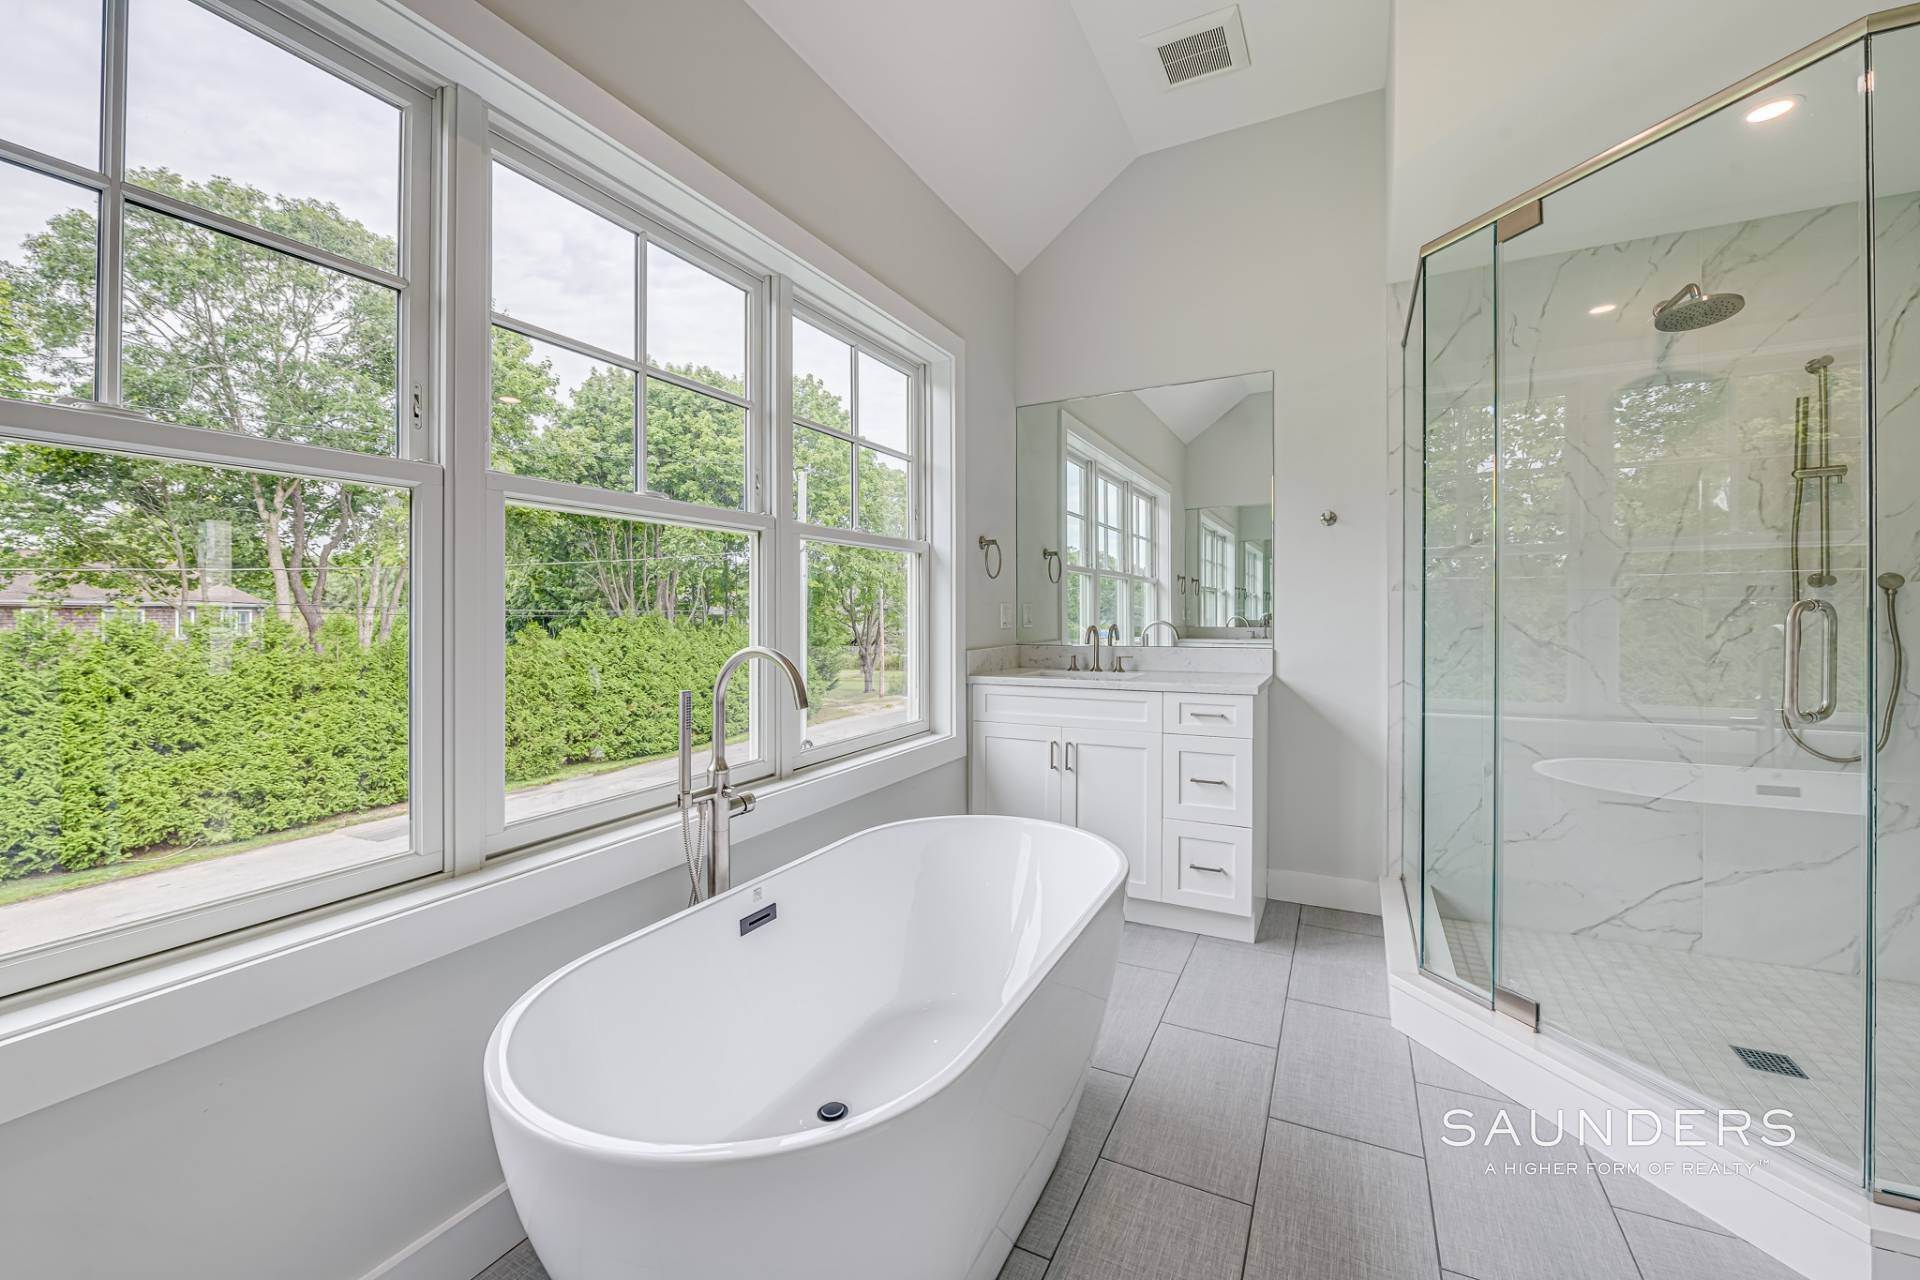 21. Single Family Homes for Sale at New Construction With Saltwater Pool In Desirable Quogue Village 46 Jessup Avenue, Quogue, NY 11959